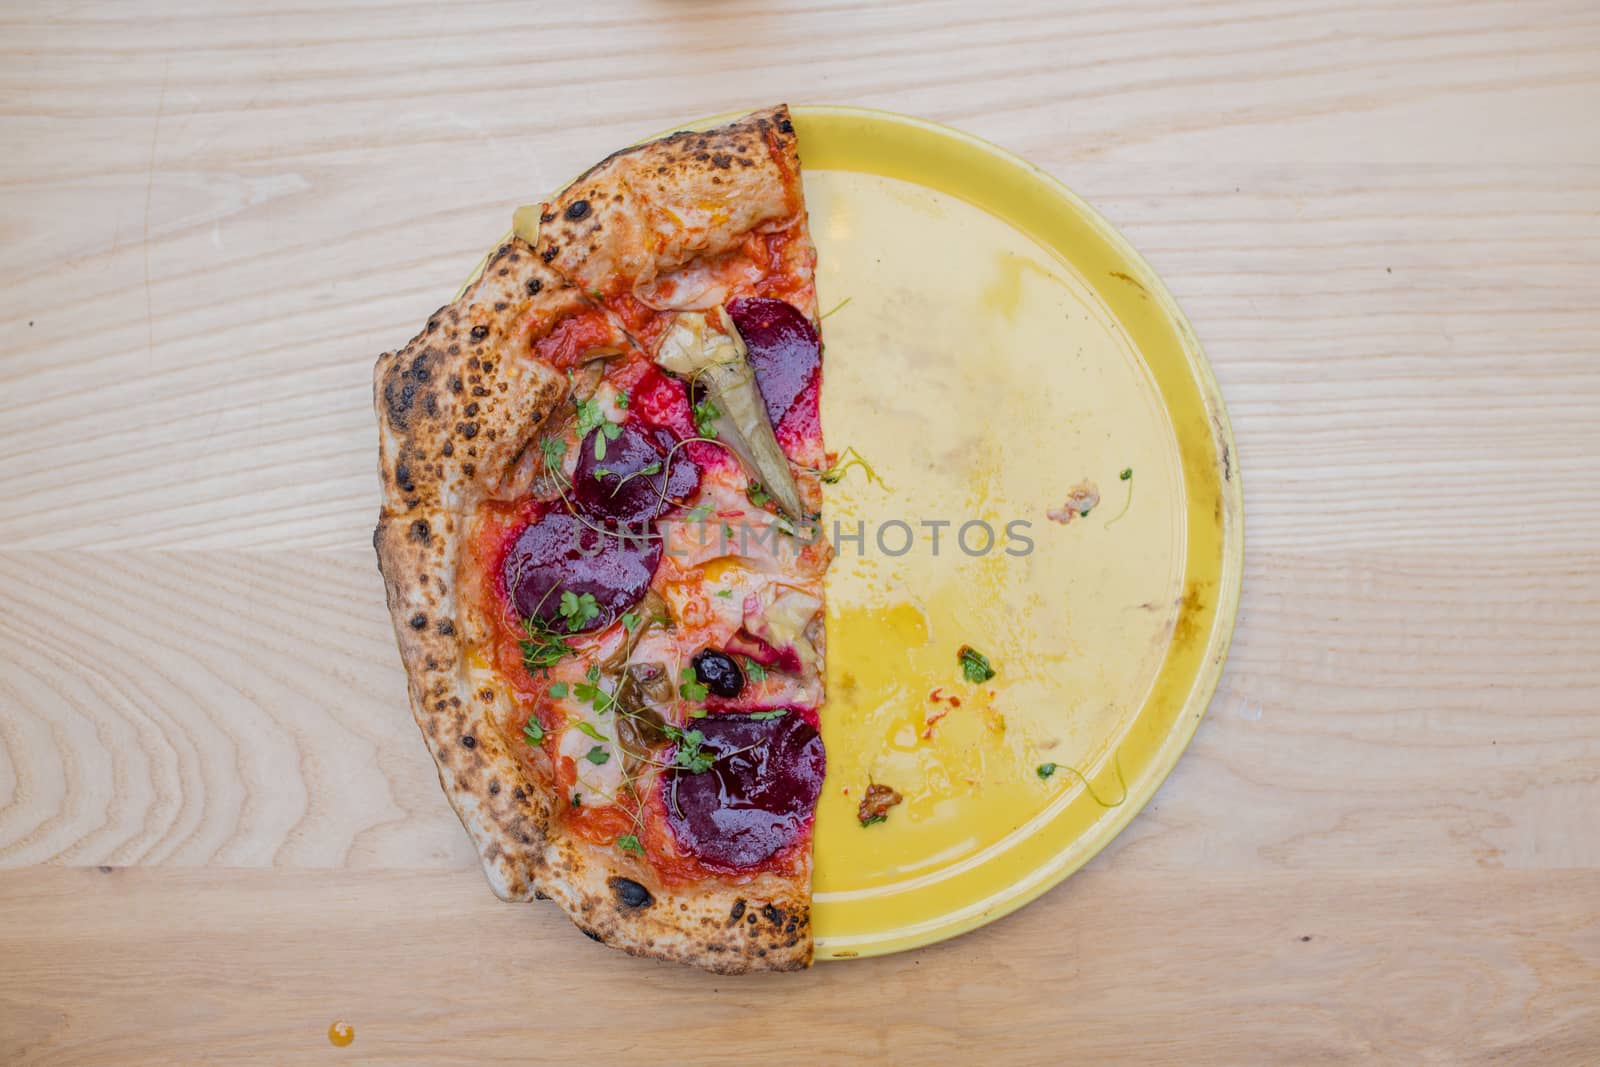 Above view of half a thick and tasty looking vegan pizza on a yellow plate above a wooden table